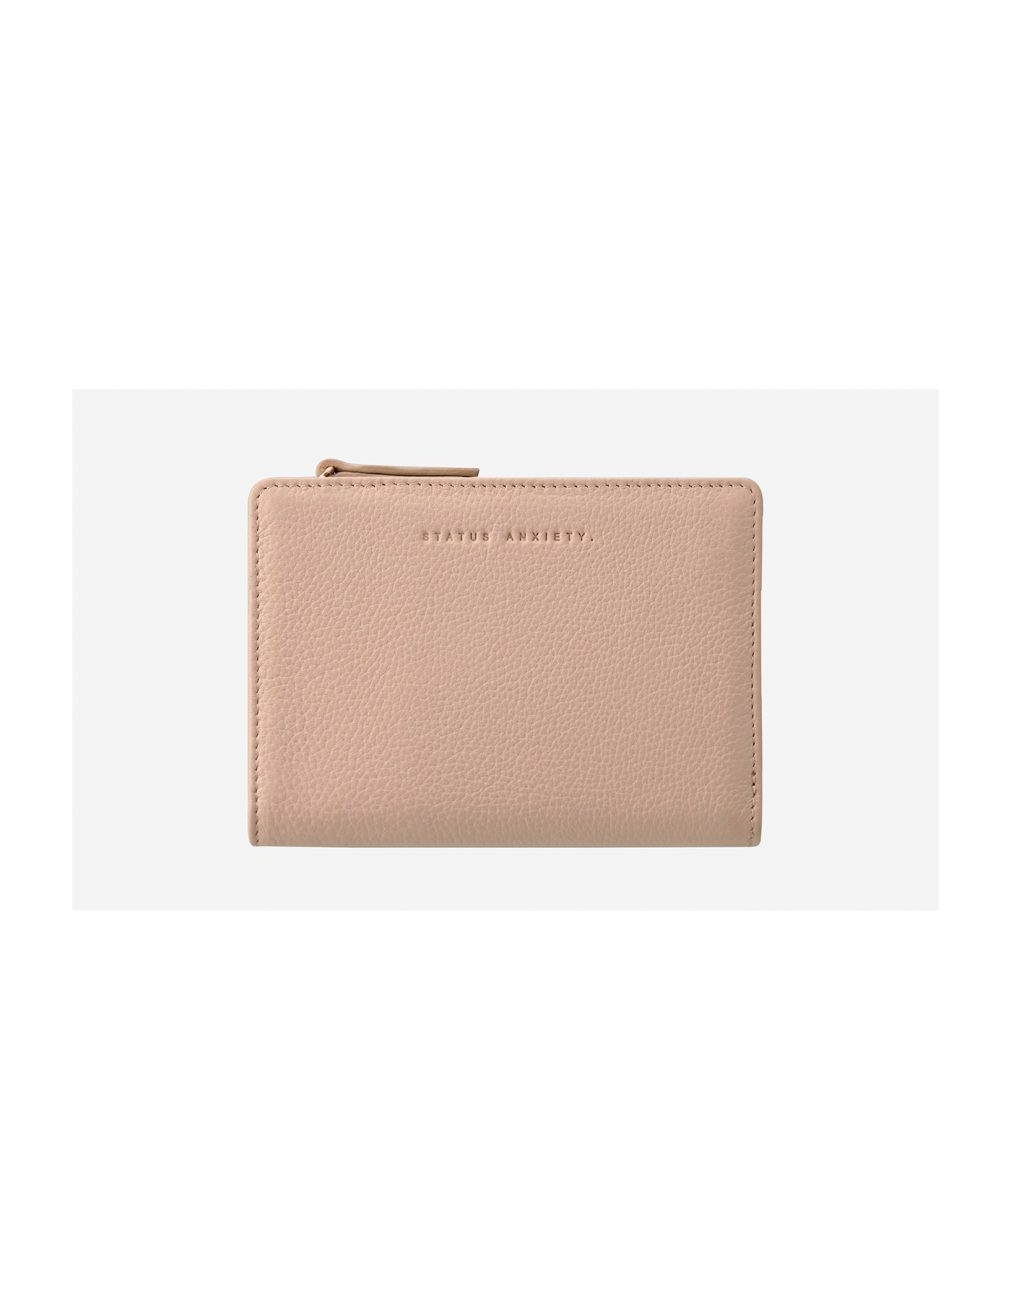 statusanxietycampaign-wallet-insurgency-dusty-pink-3-lifestyle-img_2000x